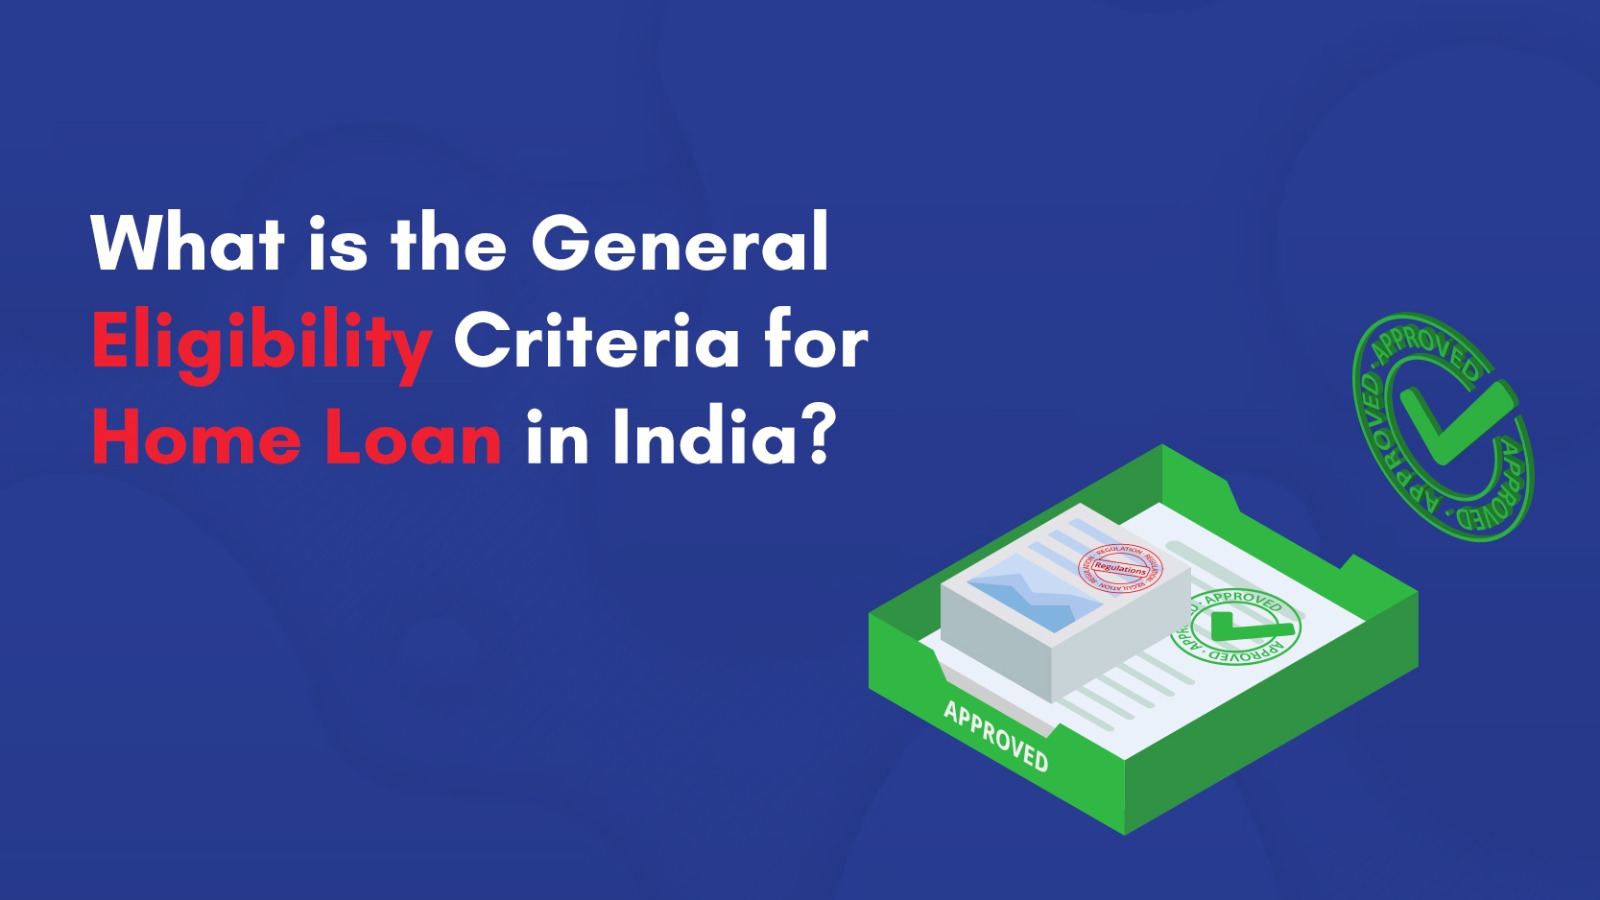 What is the General Eligibility Criteria for Home Loan in India?